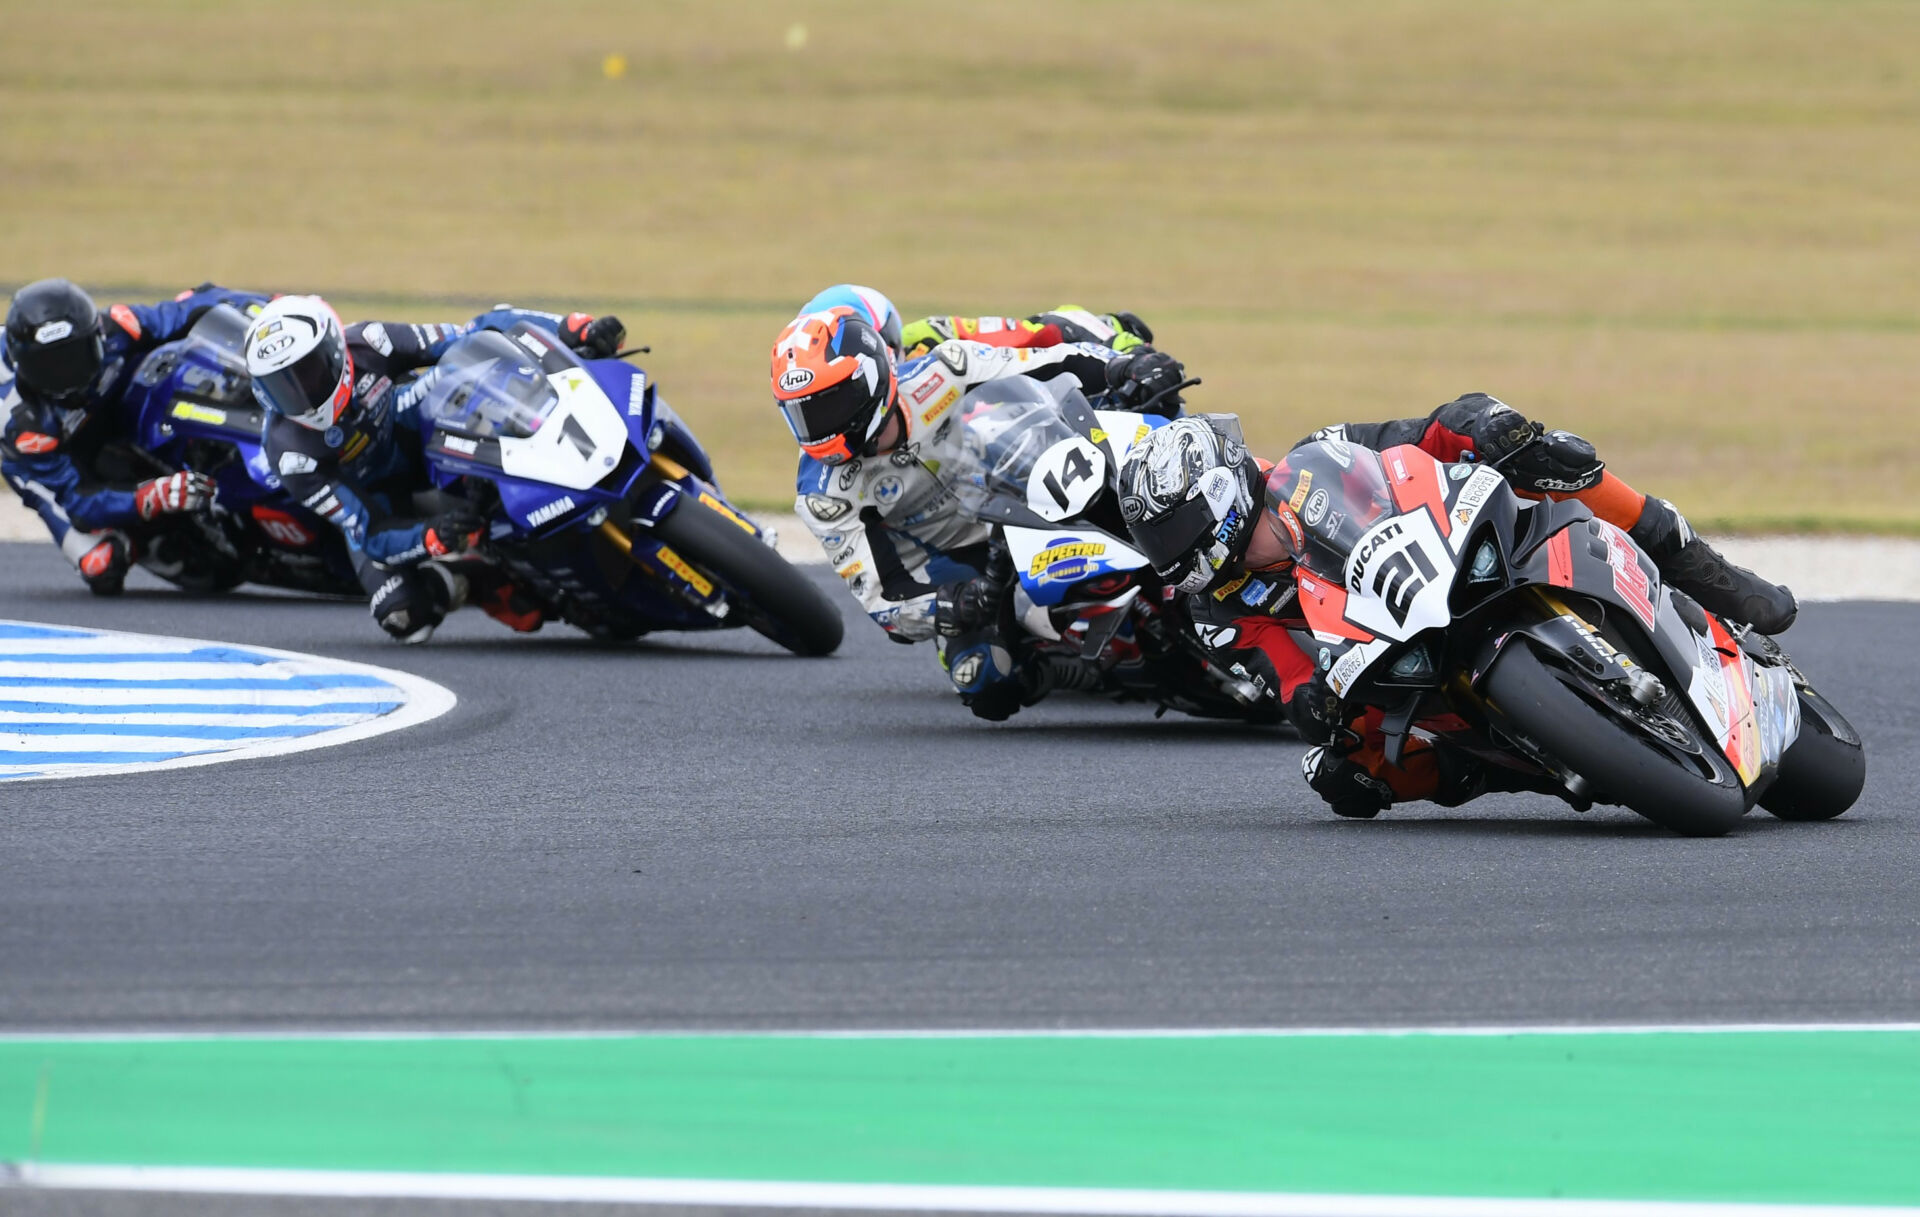 Josh Waters (21) leads Glenn Allerton (14), Mike Jones (1), and the rest during an Australian Superbike race Sunday at Phillip Island. Photo courtesy ASBK.